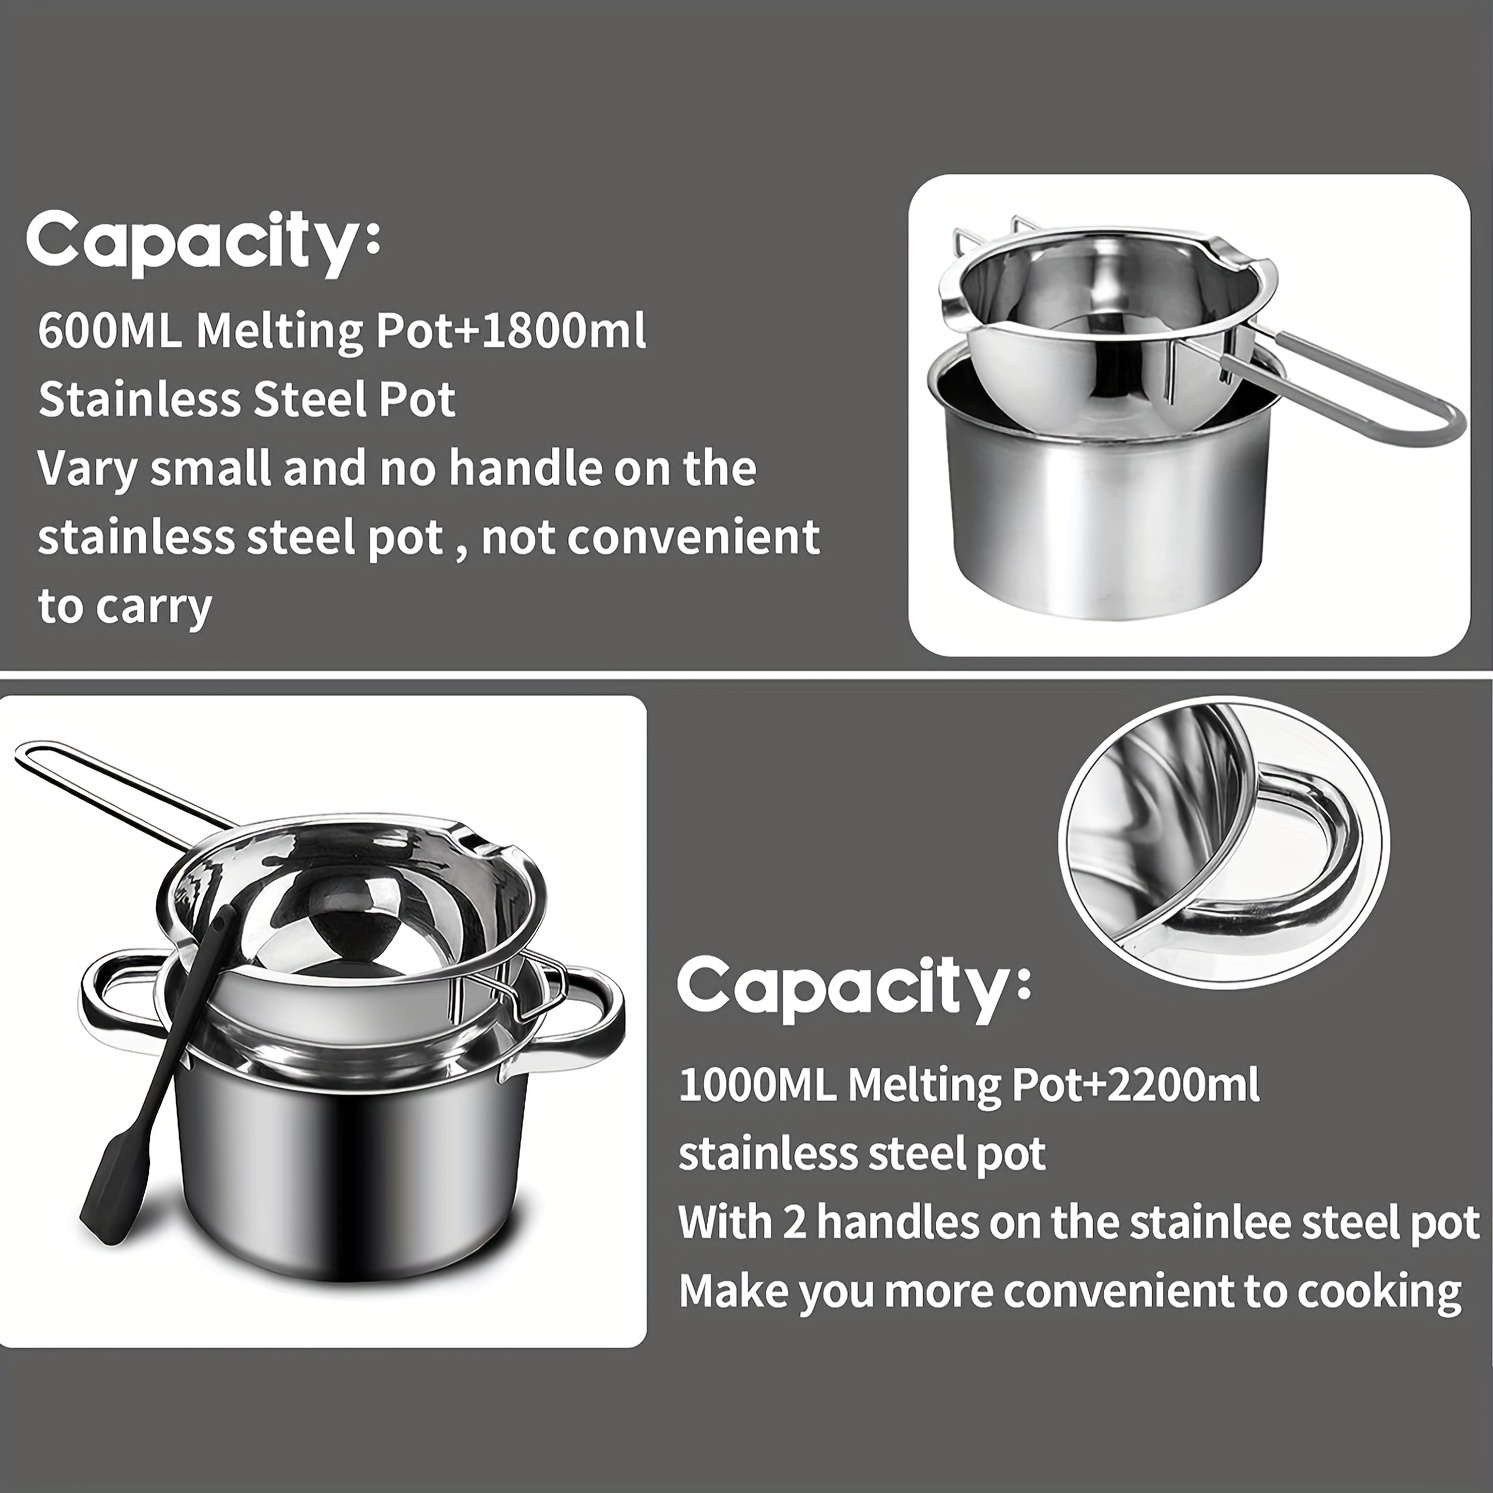  Double Boiler Pot 1200ML/1.1QT, Stainless Steel Chocolate  Melting Pot for Melting Chocolate, Candy, Candle, Soap, Wax: Home & Kitchen